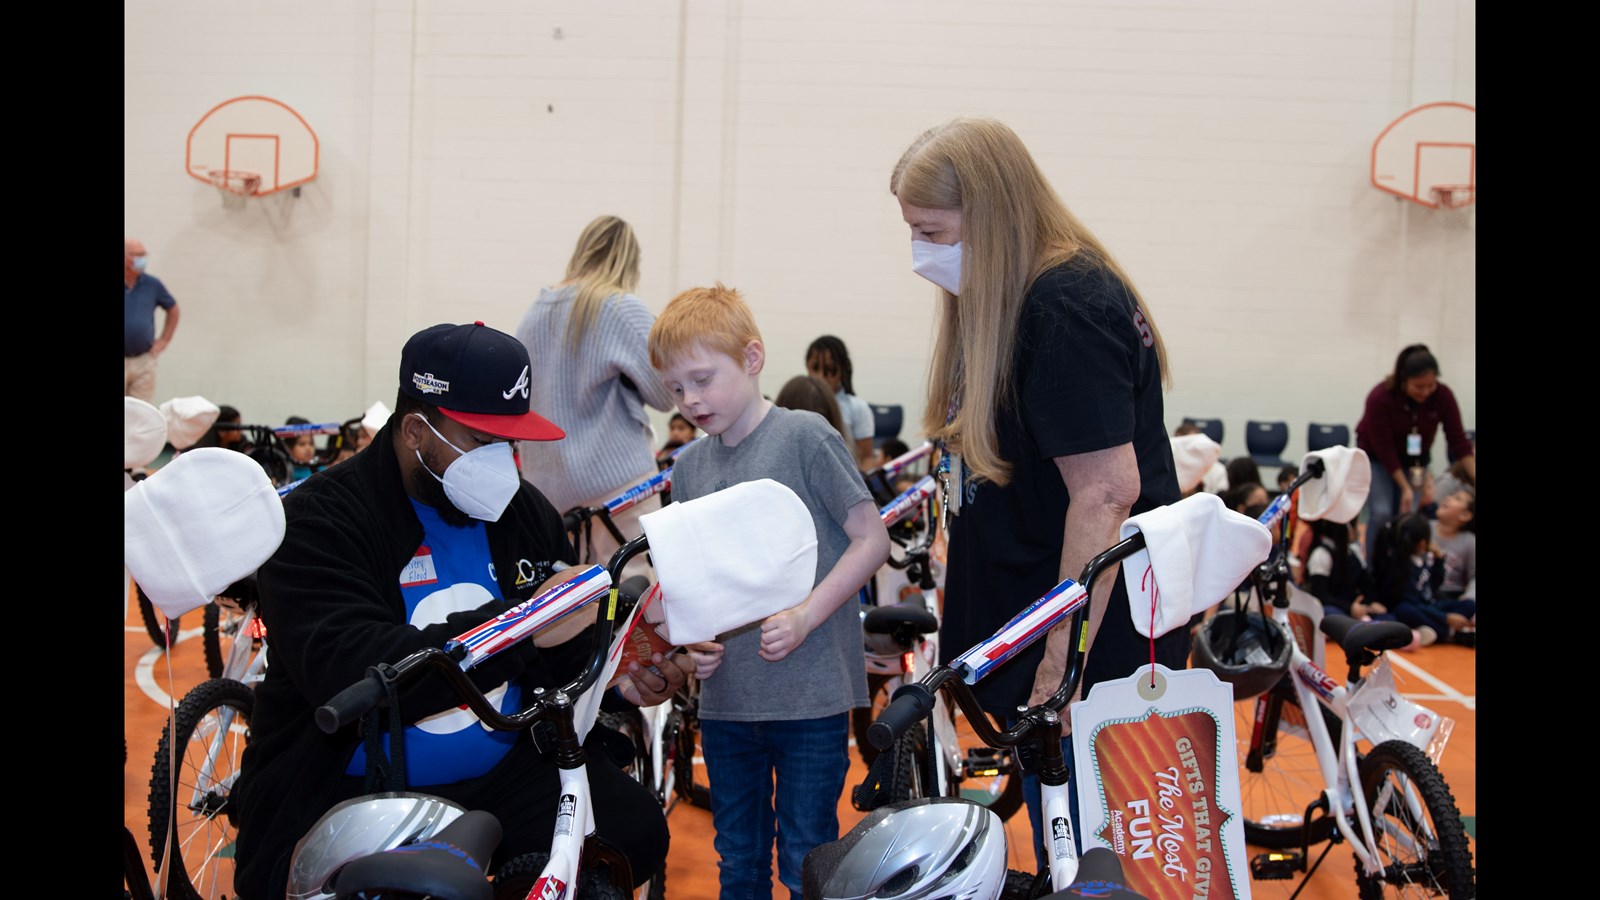 Season of Giving Continues: Academy Sports Gives 100 Bikes to Green Acres  Students, Omni Hotels Surprises a Teacher, Principal